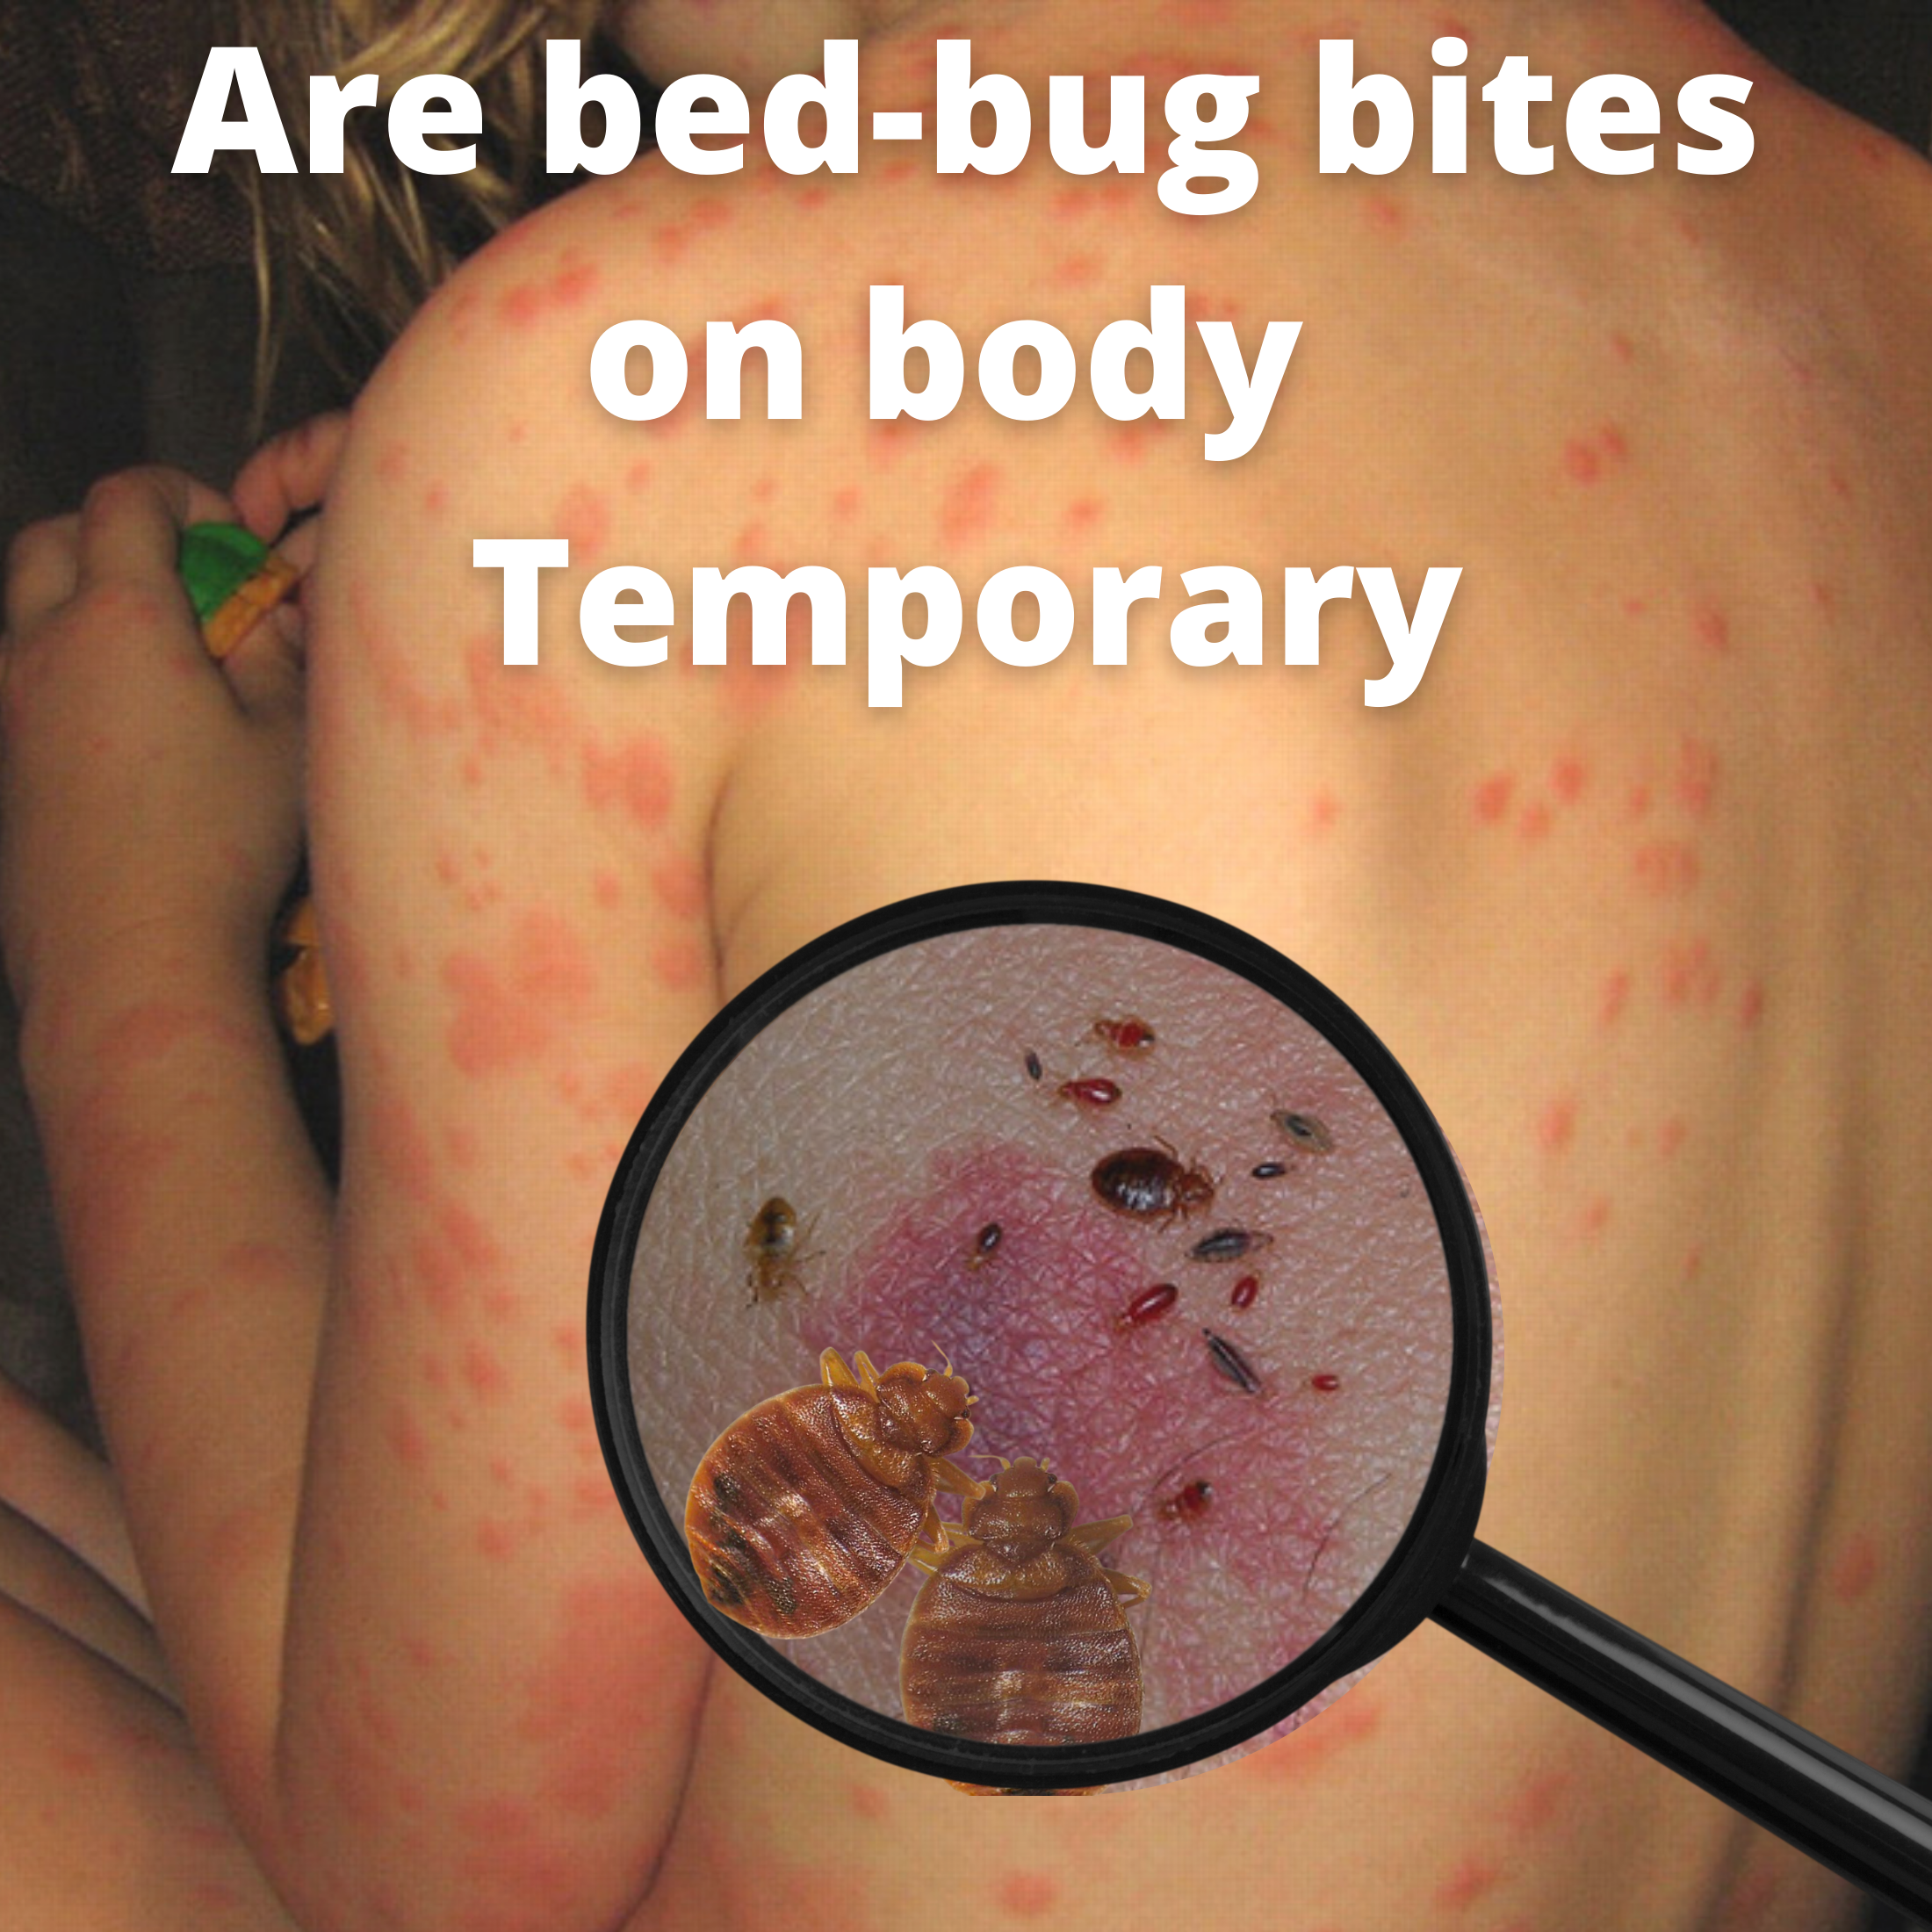 Are bed bug bites on the body temporary?